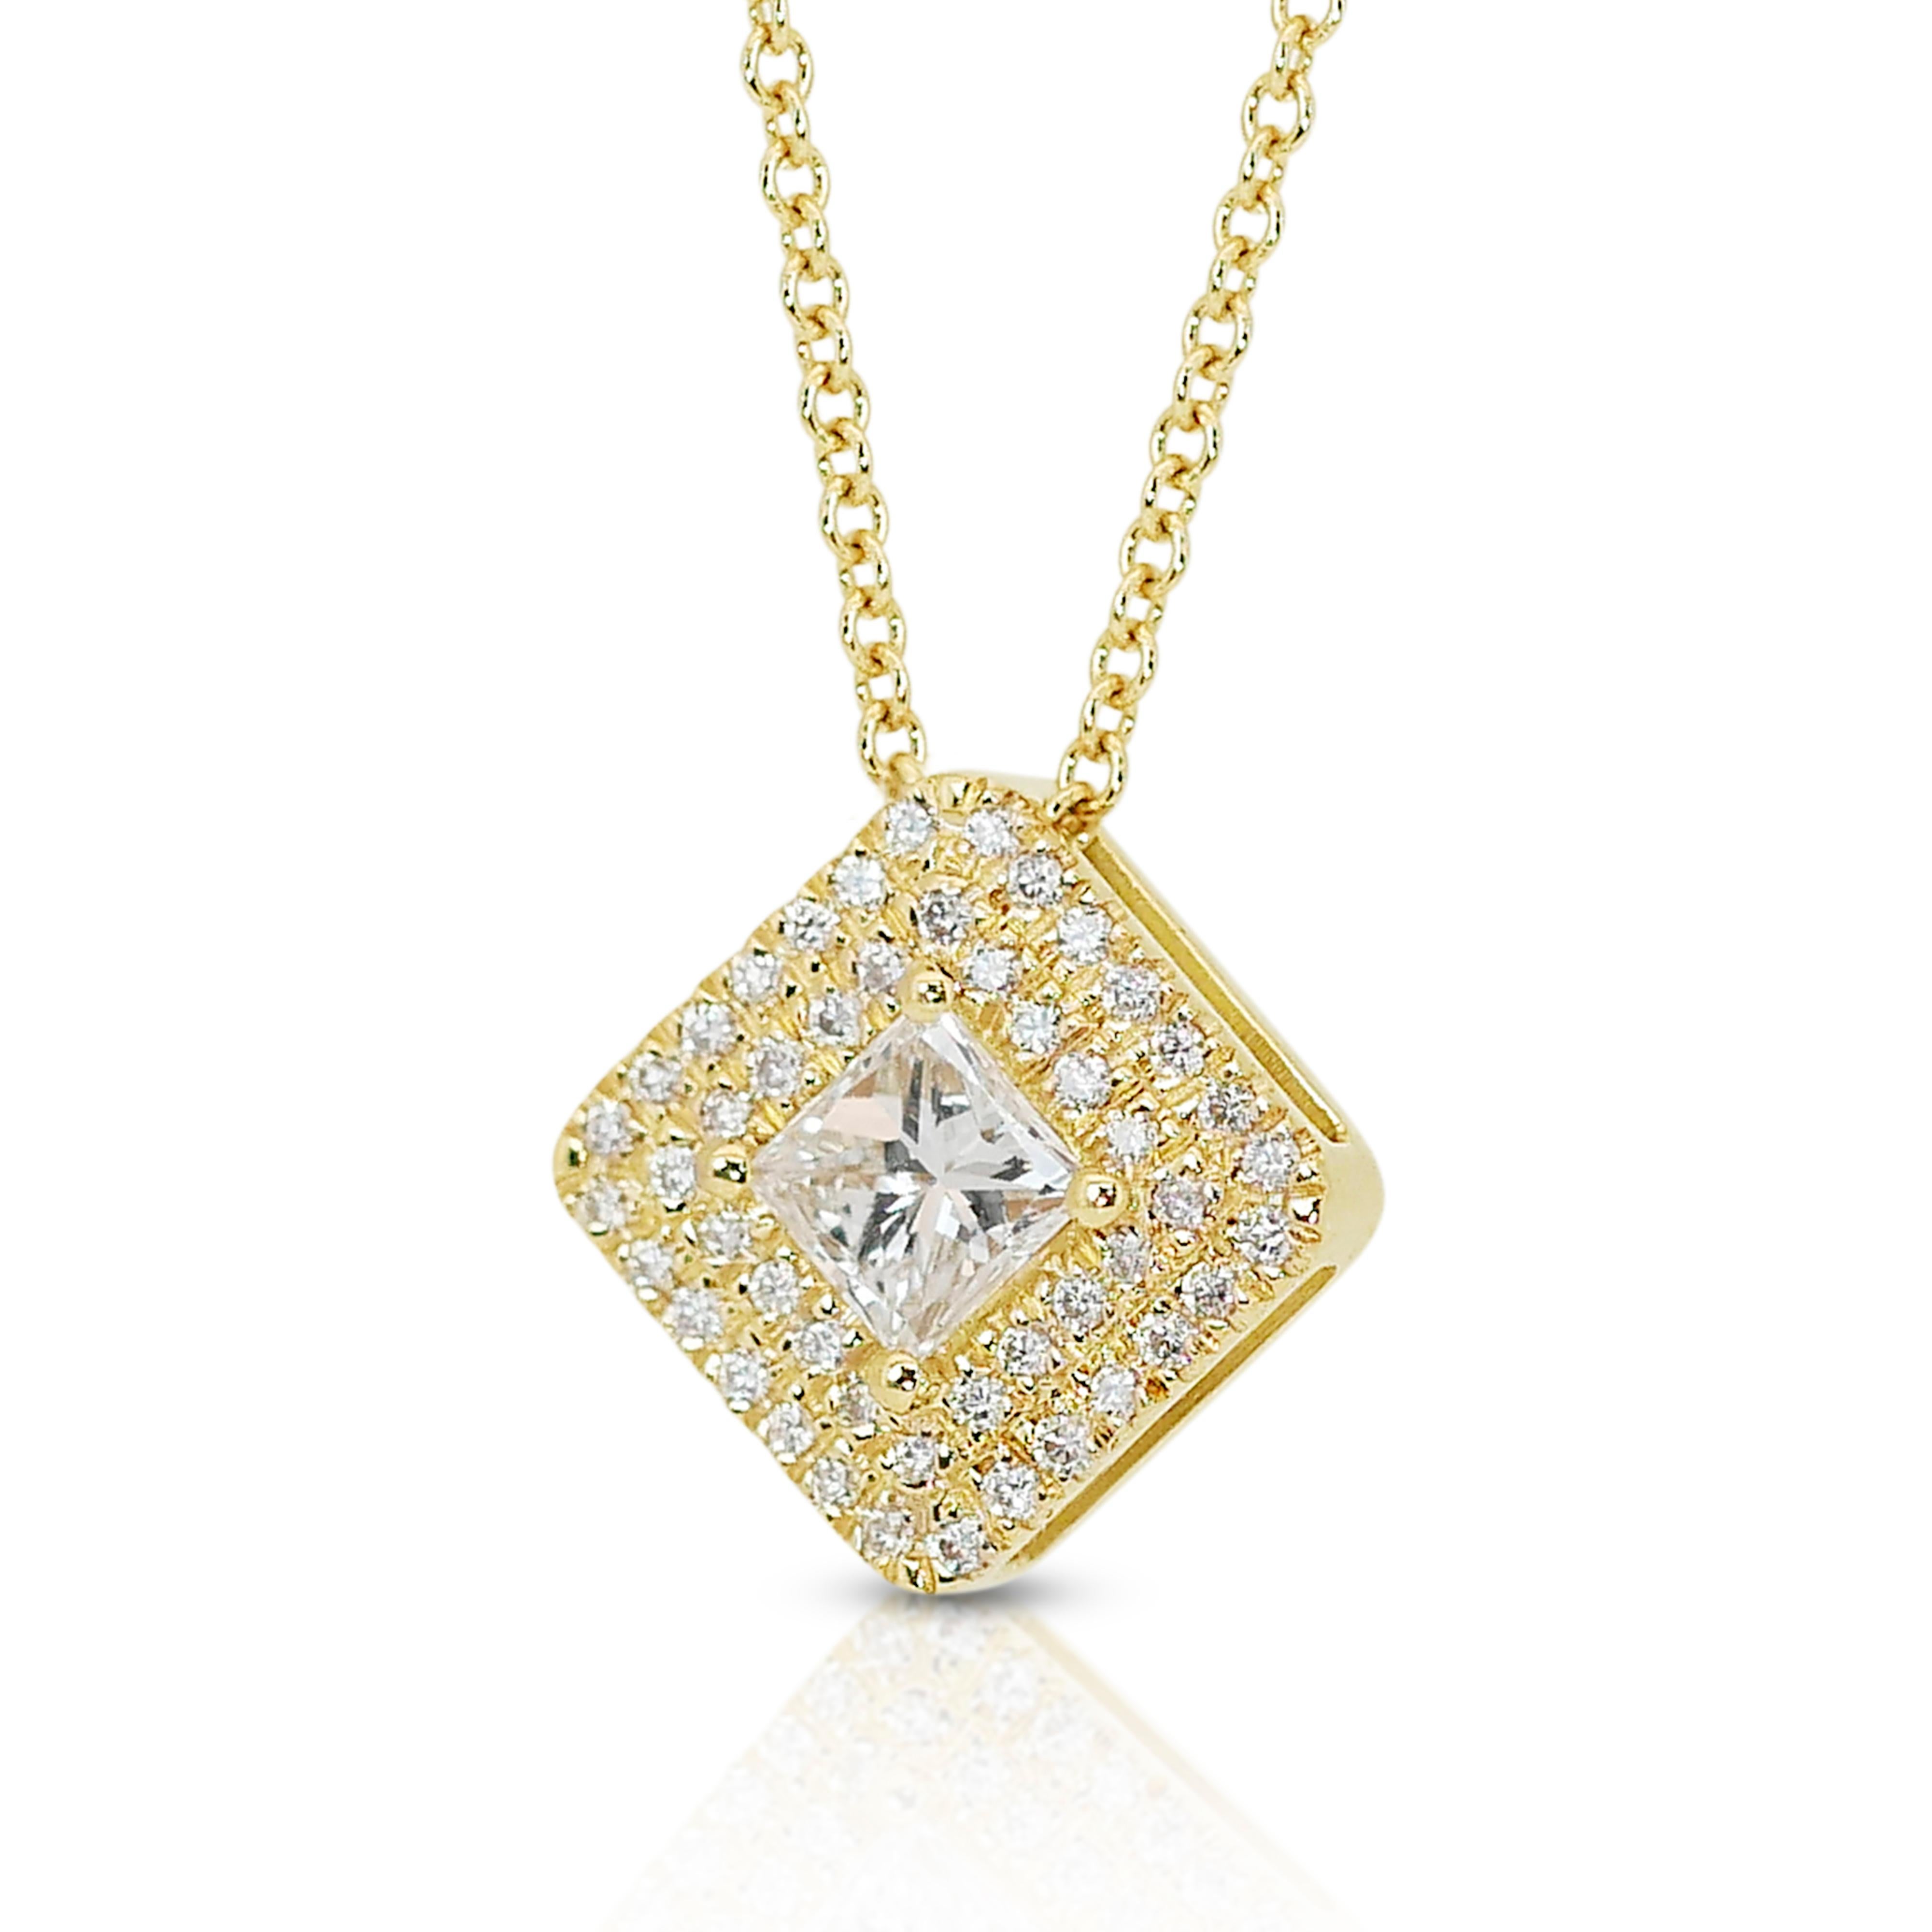 Sophisticated 0.60ct Diamonds Double Halo Necklace in 18k Yellow Gold - IGI Cert In New Condition For Sale In רמת גן, IL